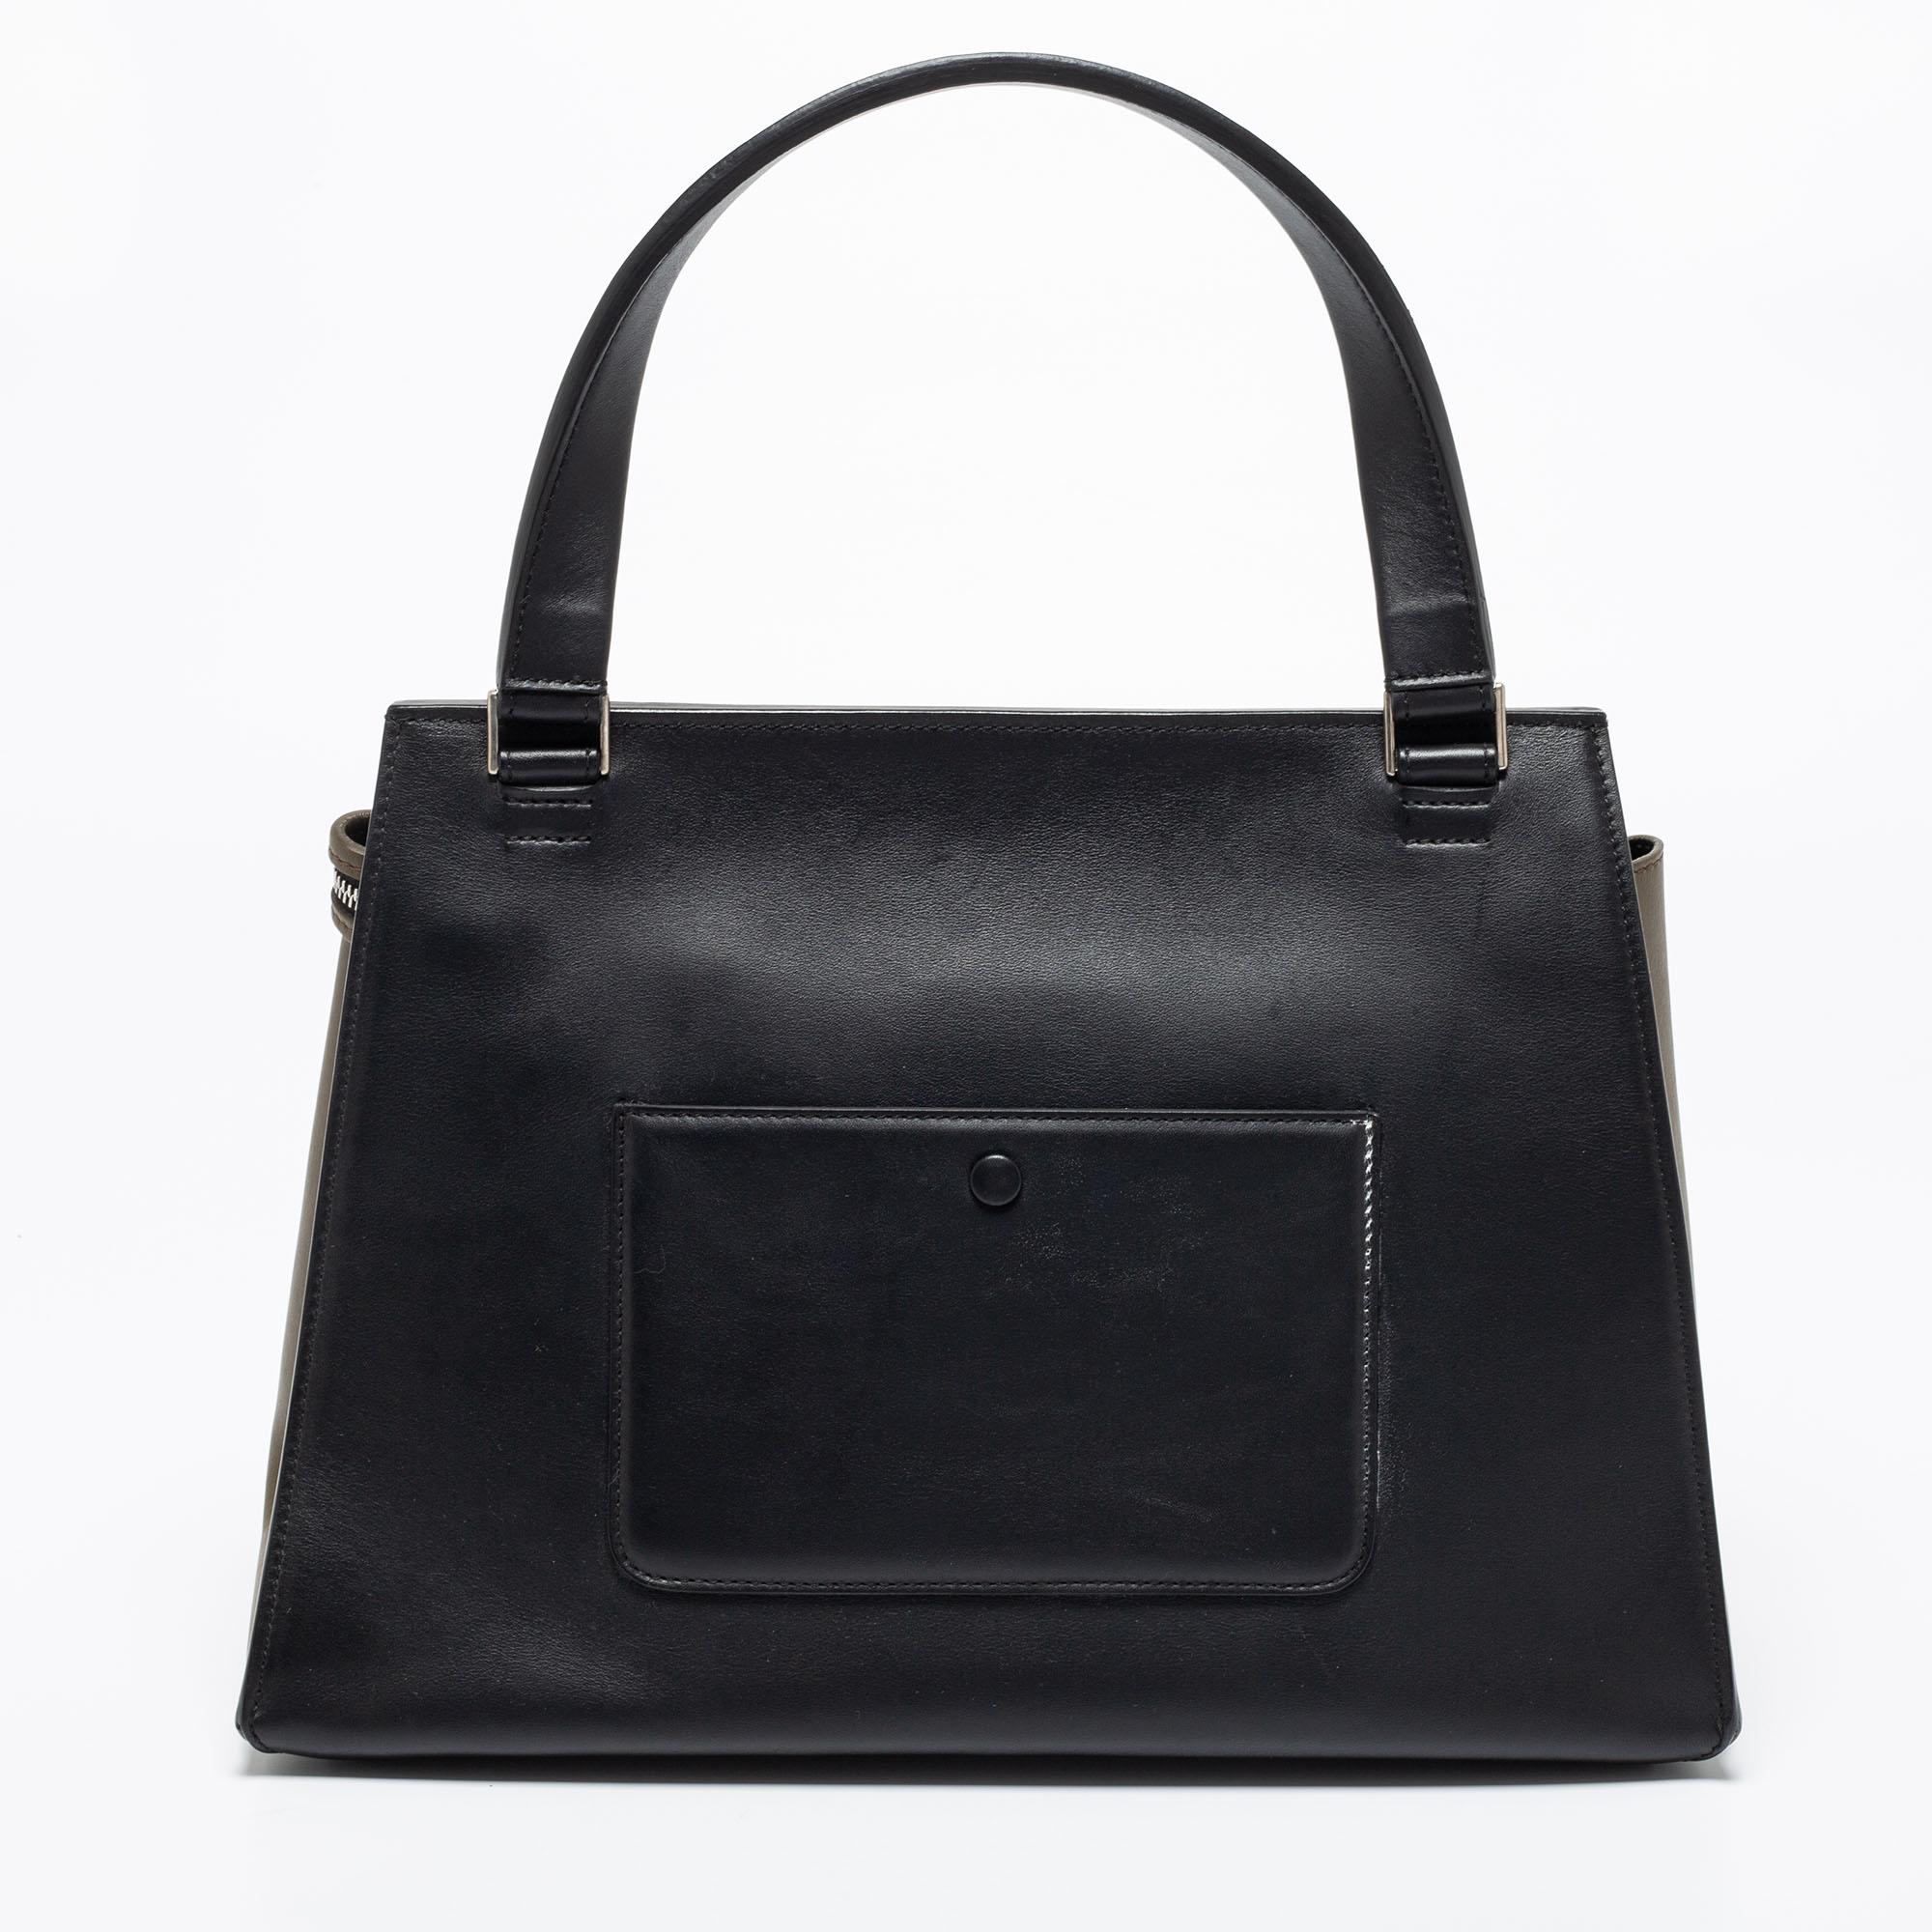 This Celine Edge bag is not only visually magnificent but also functional. It has been crafted from leather and is styled with a sleek structured silhouette. The multicolored bag has a top handle and opens into a spacious interior. It is complete